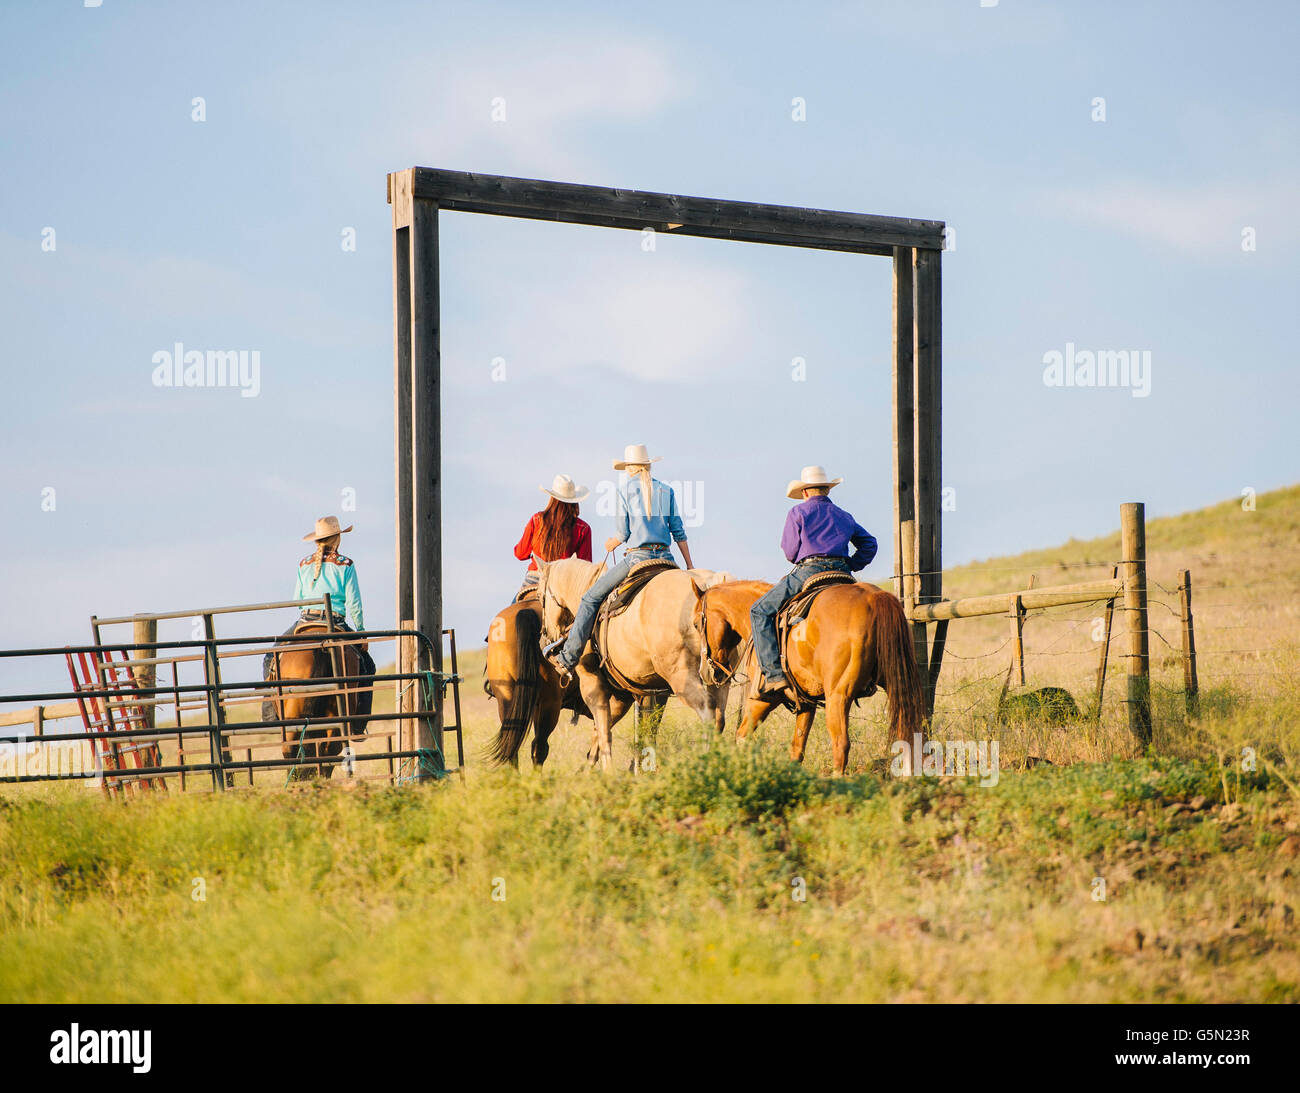 Cowboy and cowgirls riding horseback on ranch Stock Photo